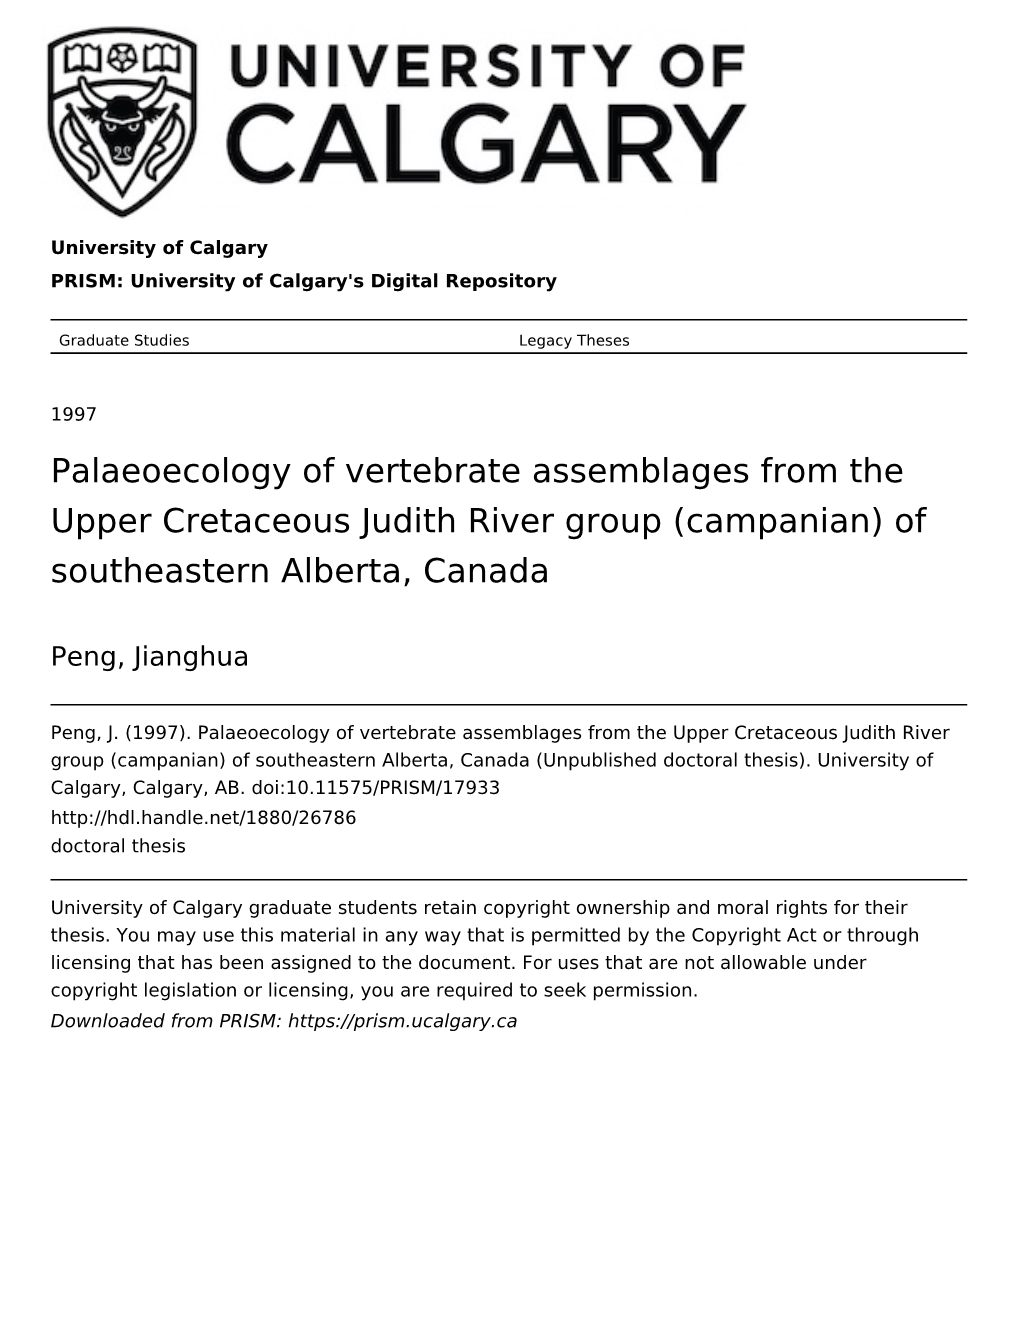 Palaeoecology of Vertebrate Assemblages from the Upper Cretaceous Judith River Group (Campanian) of Southeastern Alberta, Canada